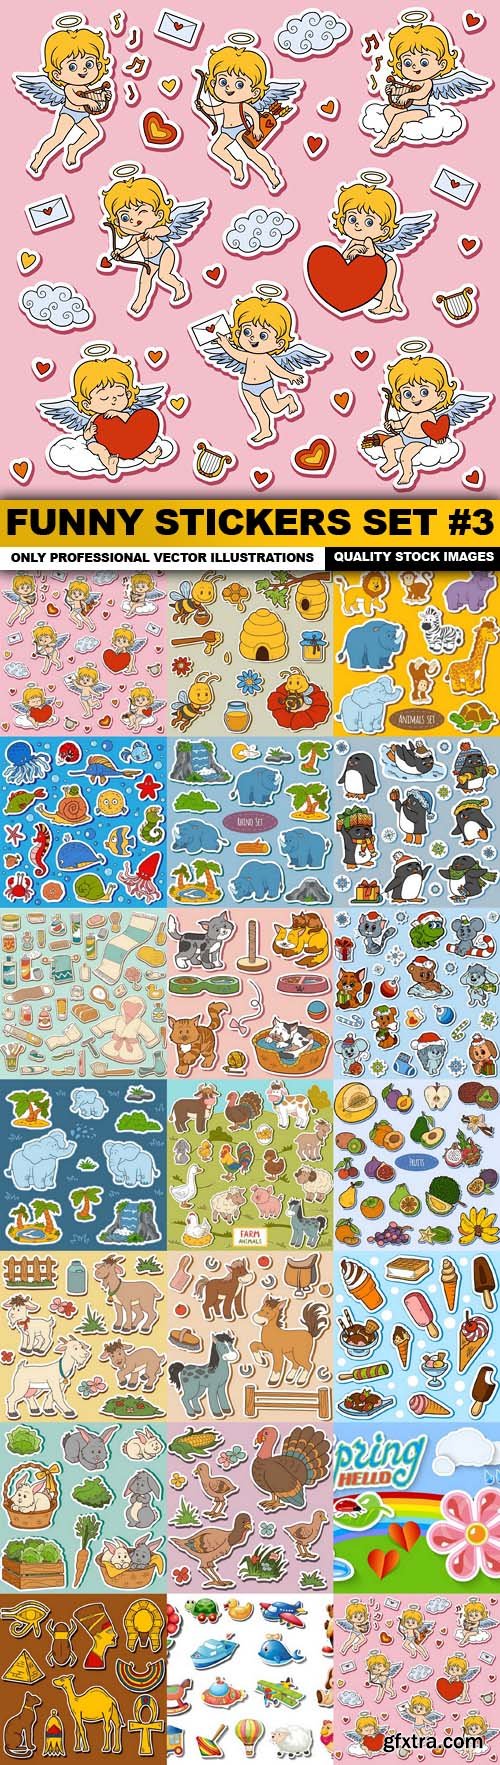 Funny Stickers Set #3 - 20 Vector